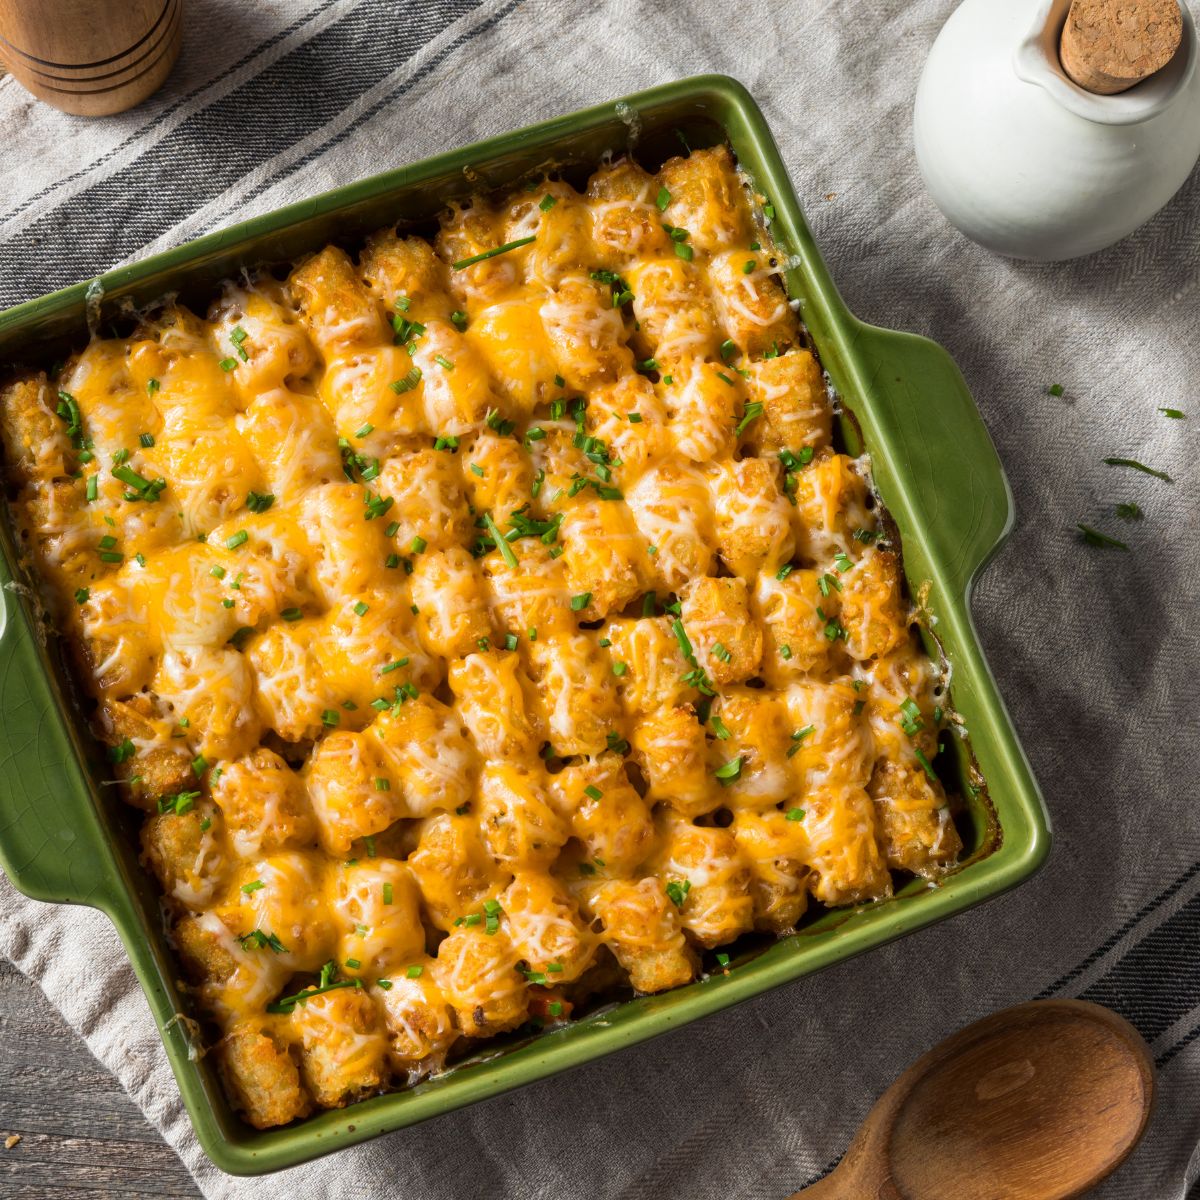 Cheesy Chicken Bacon Ranch Tater Tot casserole made as a freezer casserole in a green square casserole dish